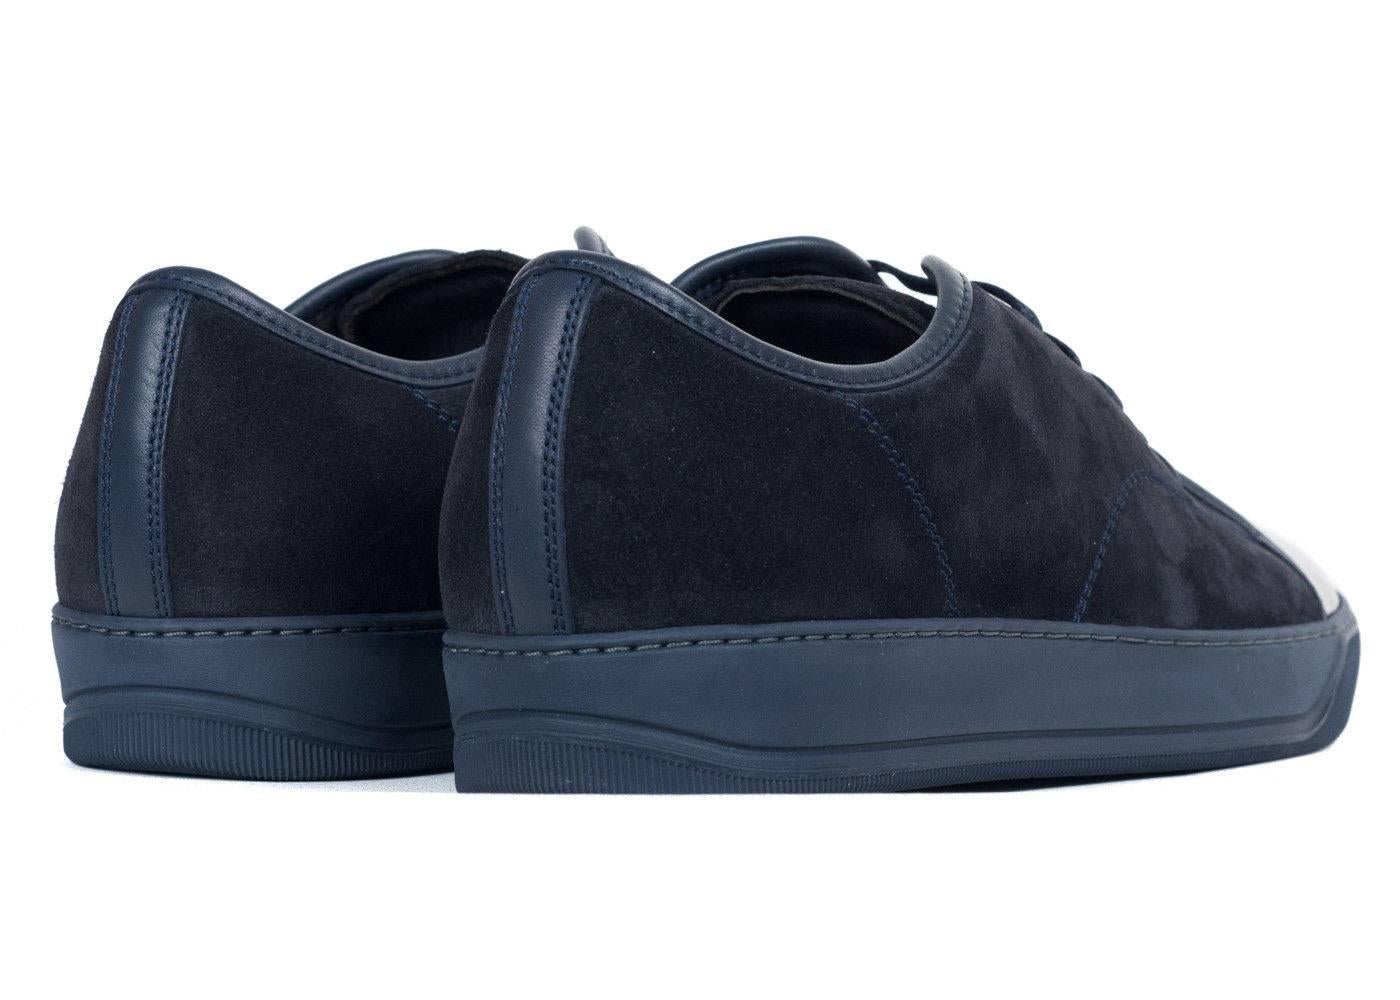 Lanvin Dark Blue Suede Patent Cap Lace Up DDB1 Sneakers In New Condition For Sale In Brooklyn, NY